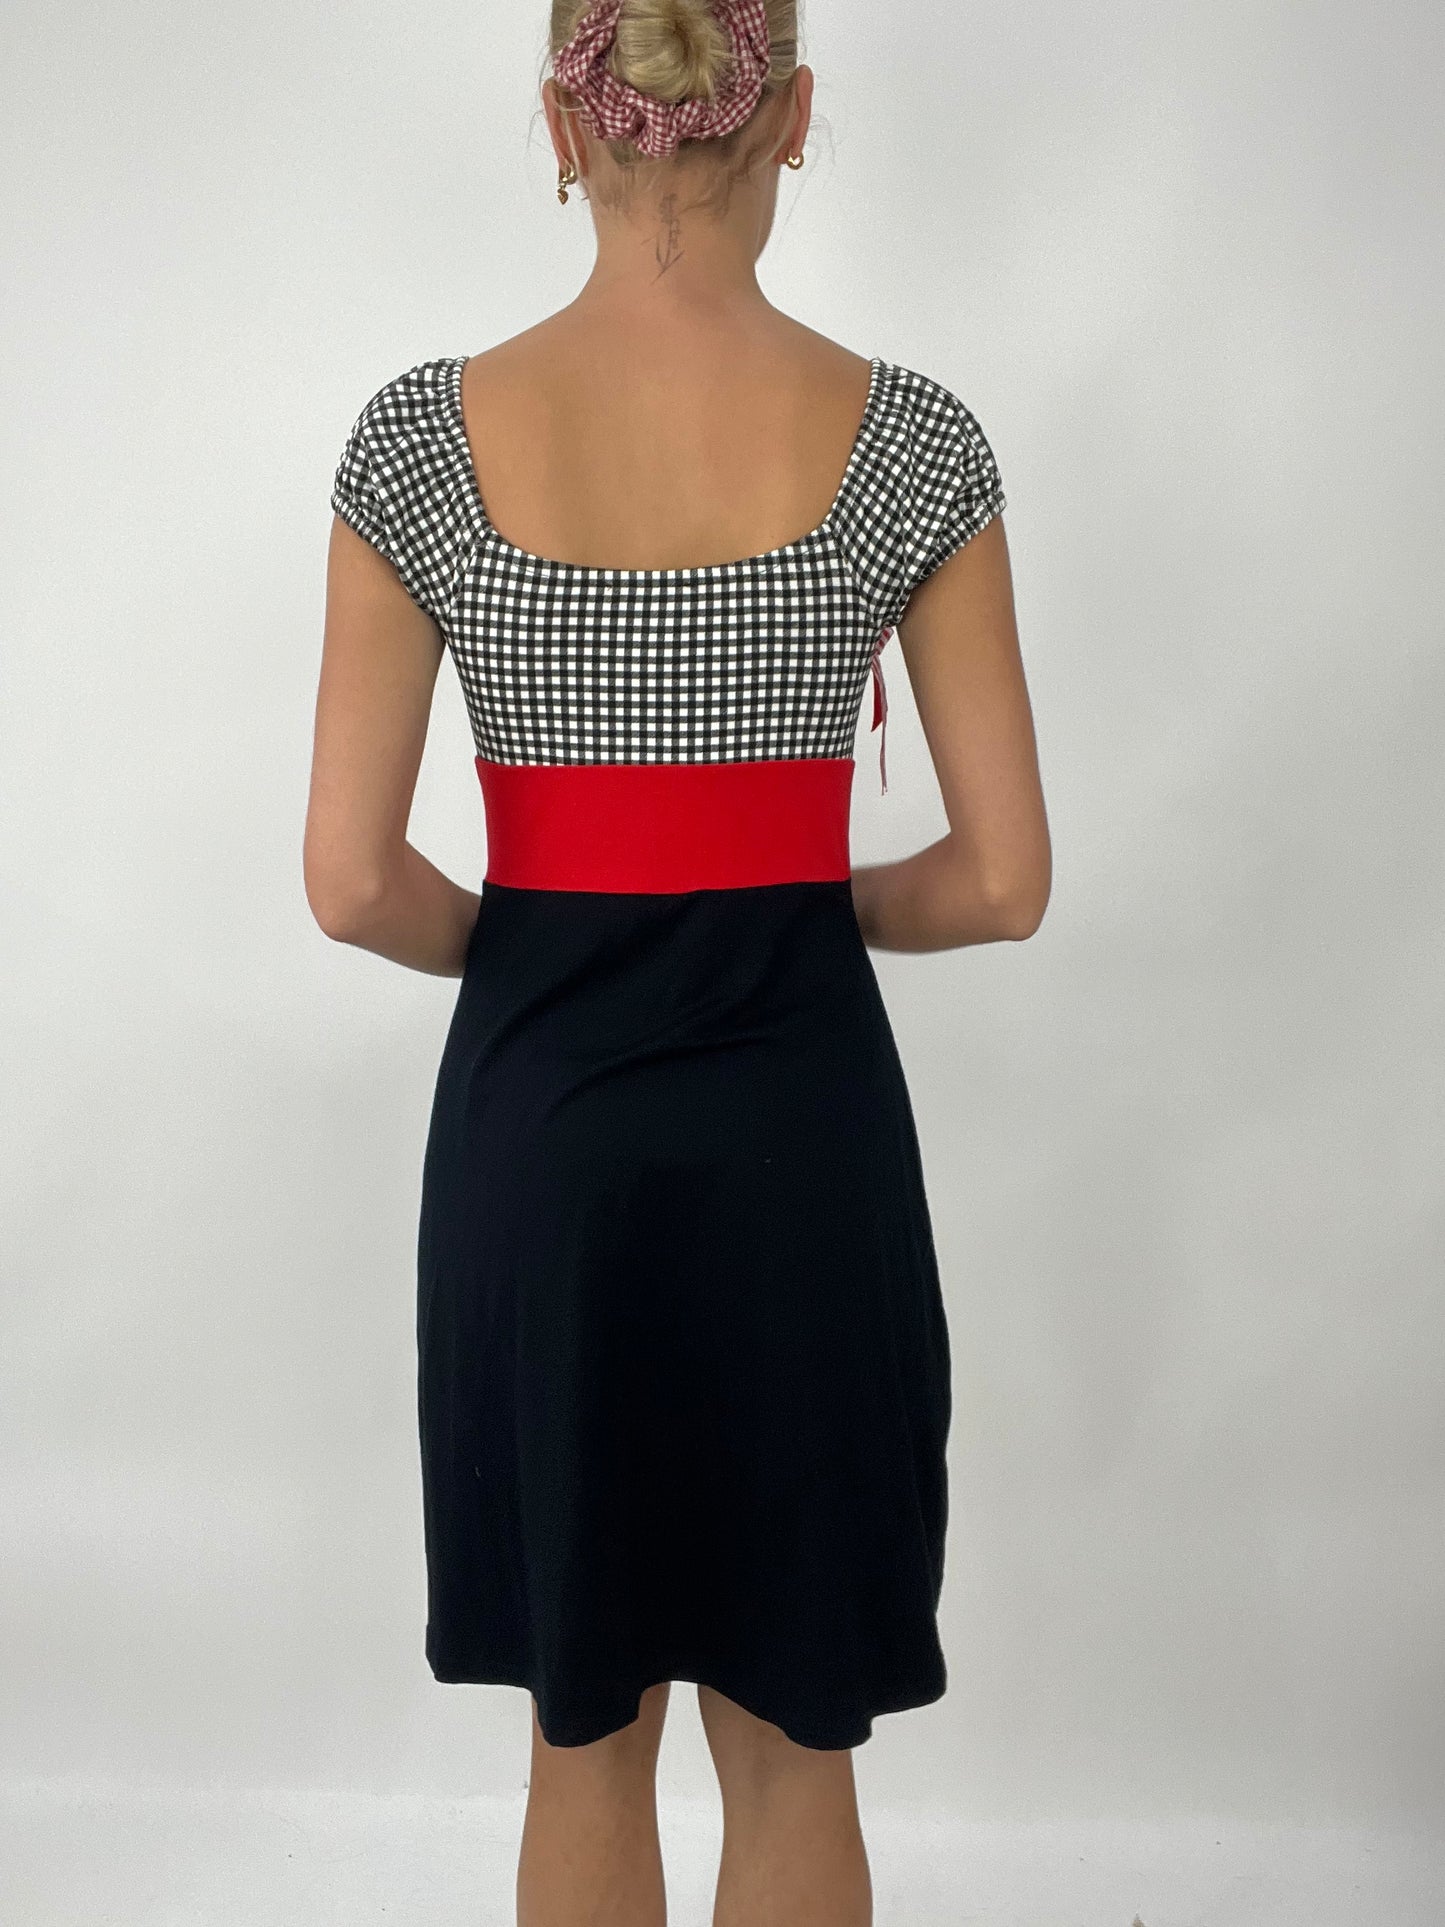 TAYLOR SWIFT DROP | medium black dress with gingham print and red banding